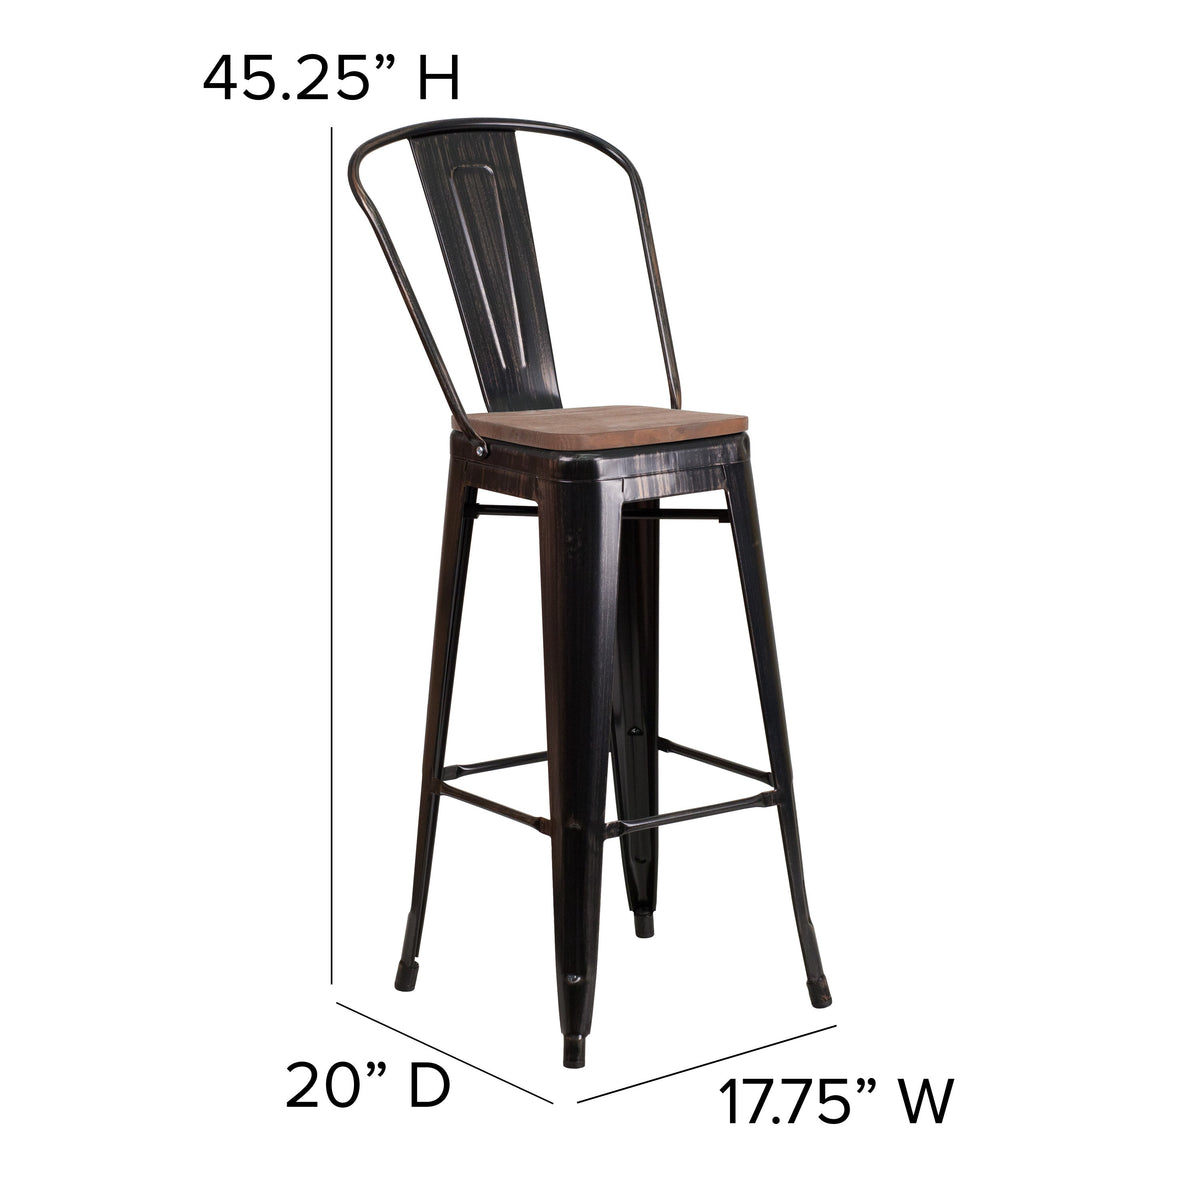 Black-Antique Gold |#| 30inch High Black-Antique Gold Metal Barstool with Back and Wood Seat - Kitchen